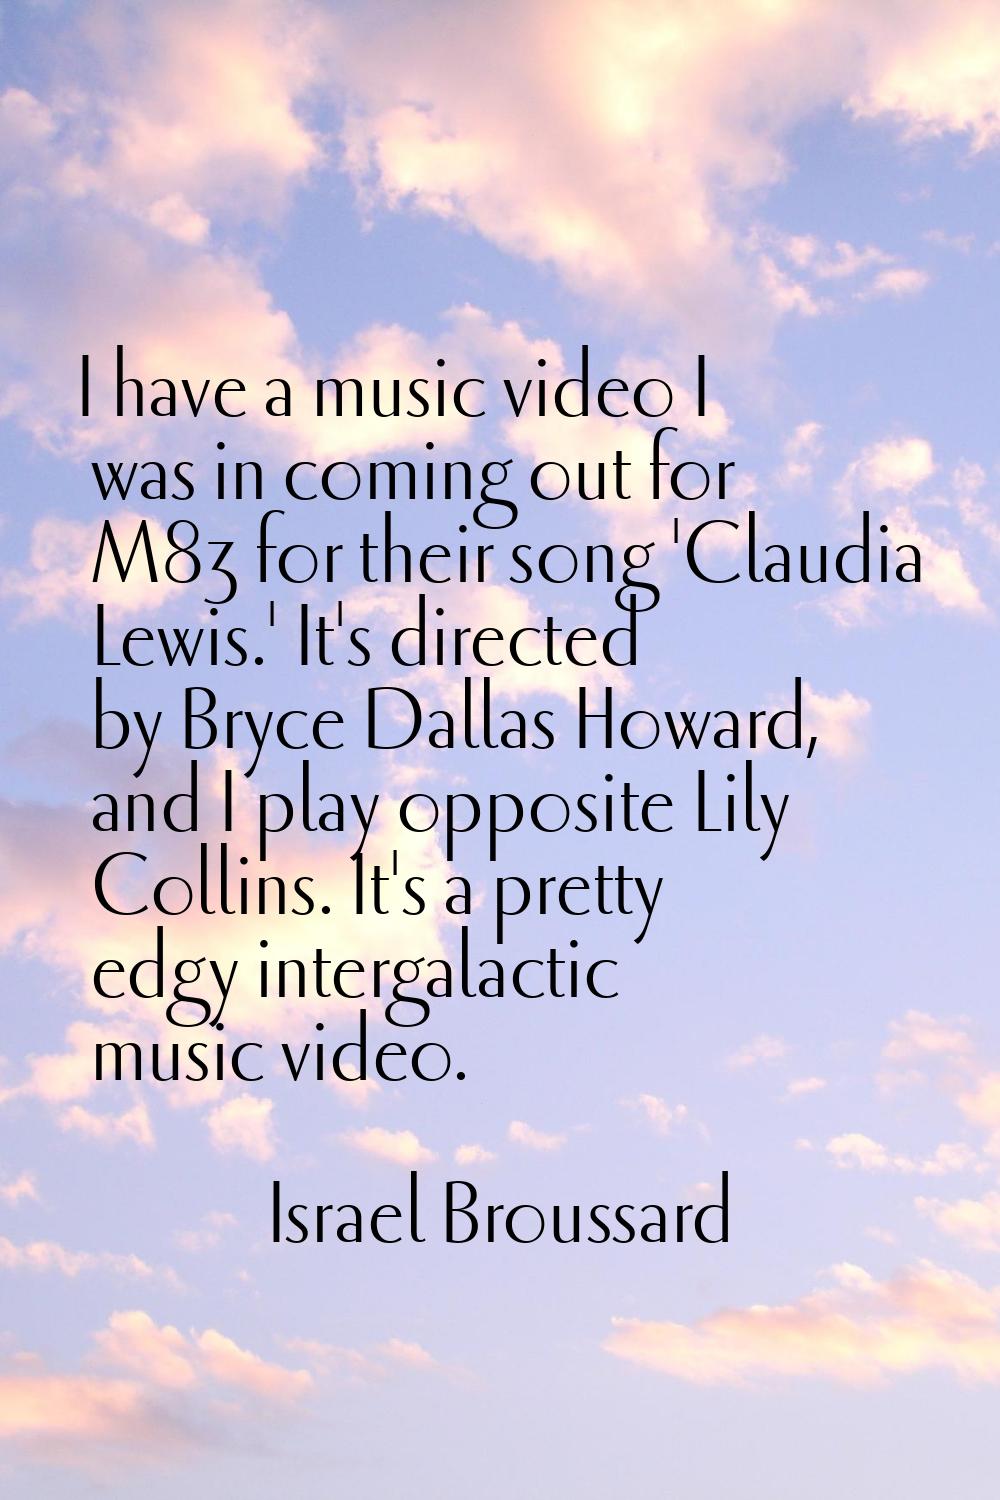 I have a music video I was in coming out for M83 for their song 'Claudia Lewis.' It's directed by B